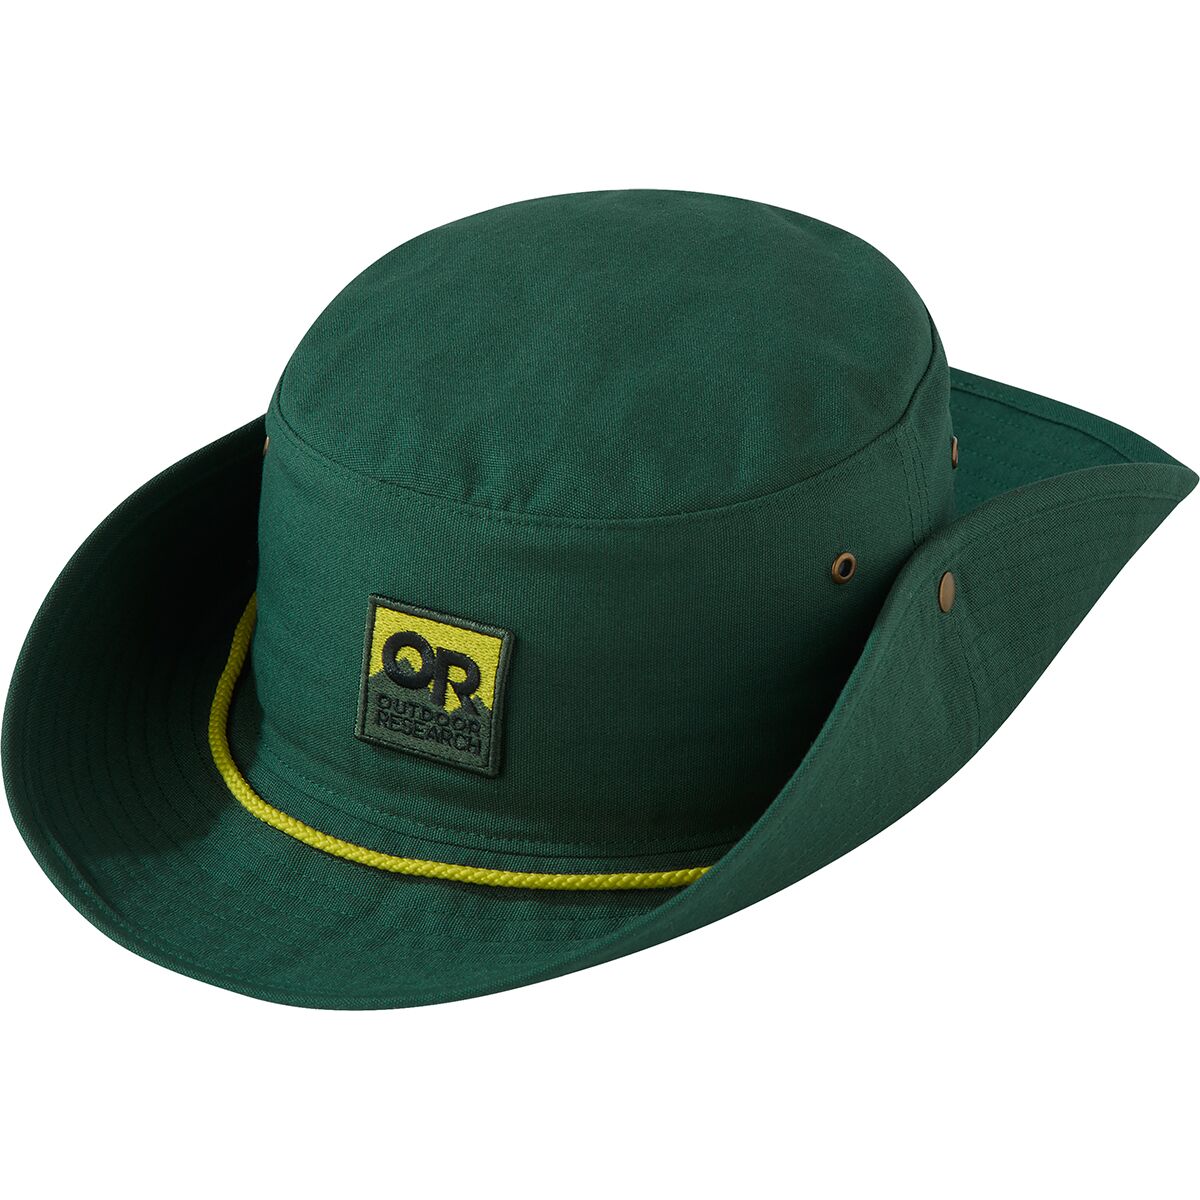 Outdoor Research Moab Sun Hat - Accessories